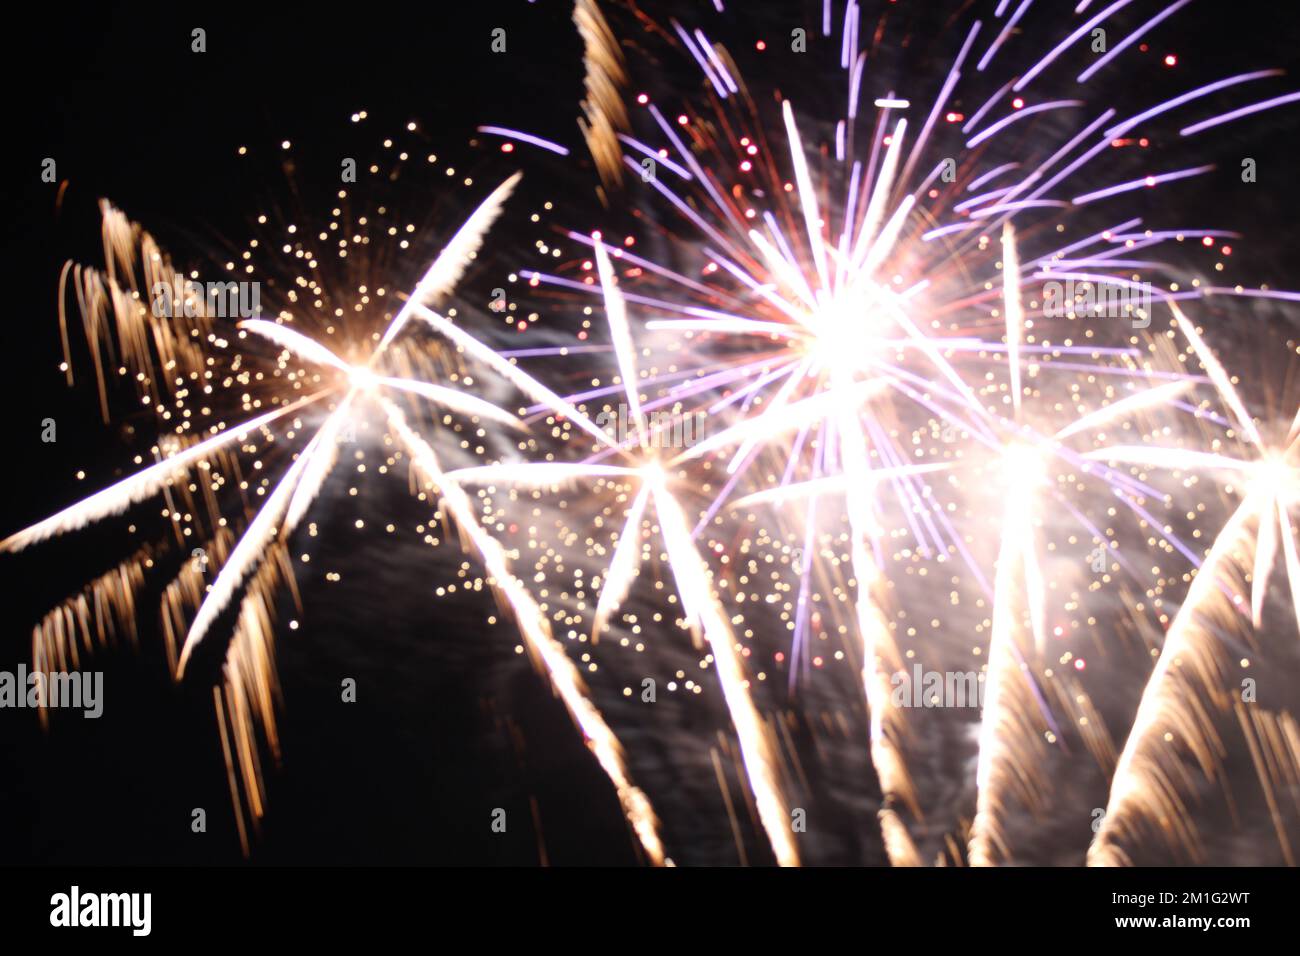 white red flashes rosette fireworks fireworks on a dark background holiday atmosphere celebrating independence day victory Stock Photo